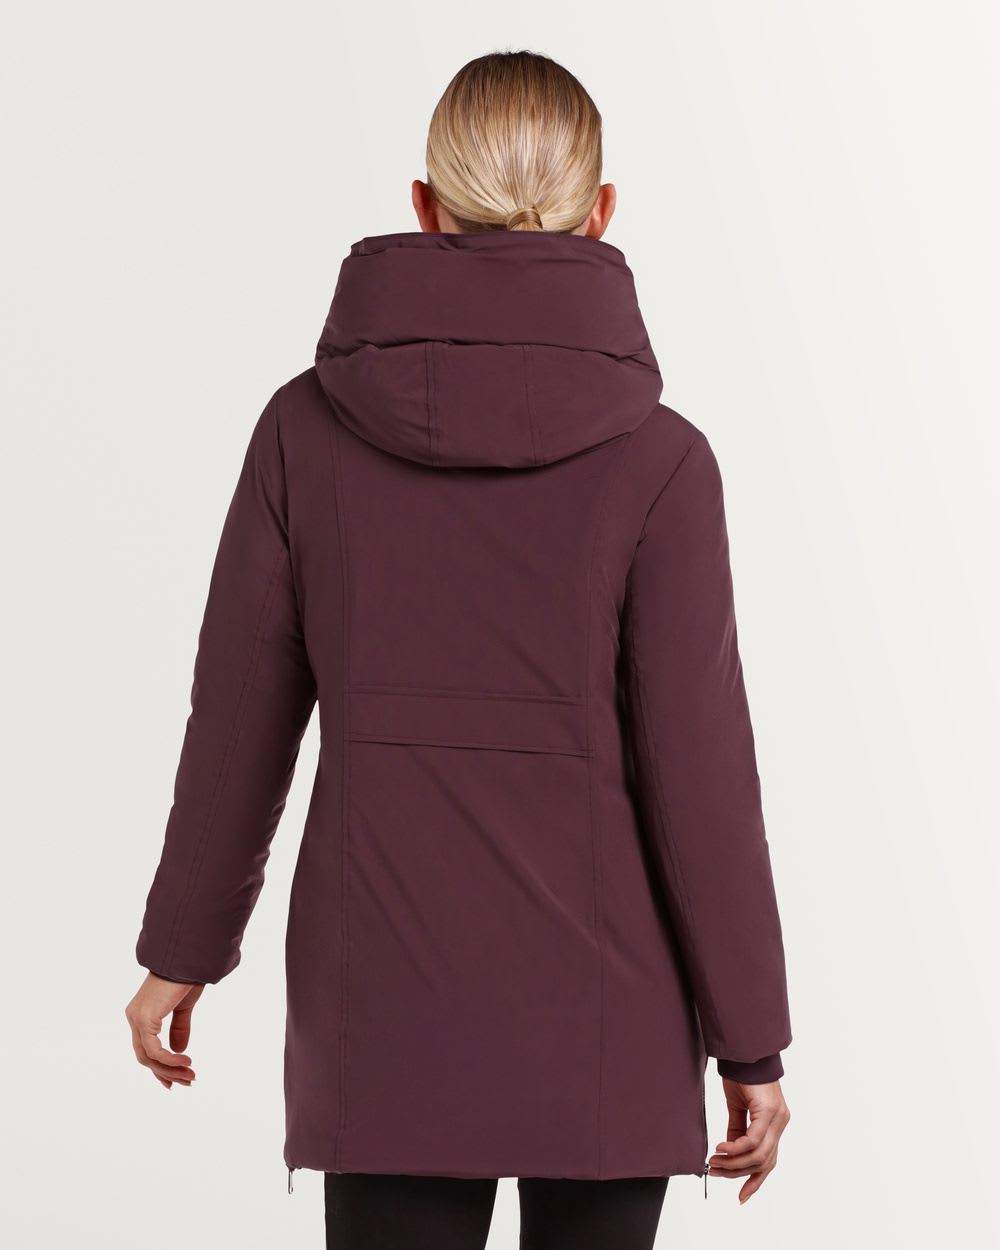 Large Hooded Synthetic Down Coat